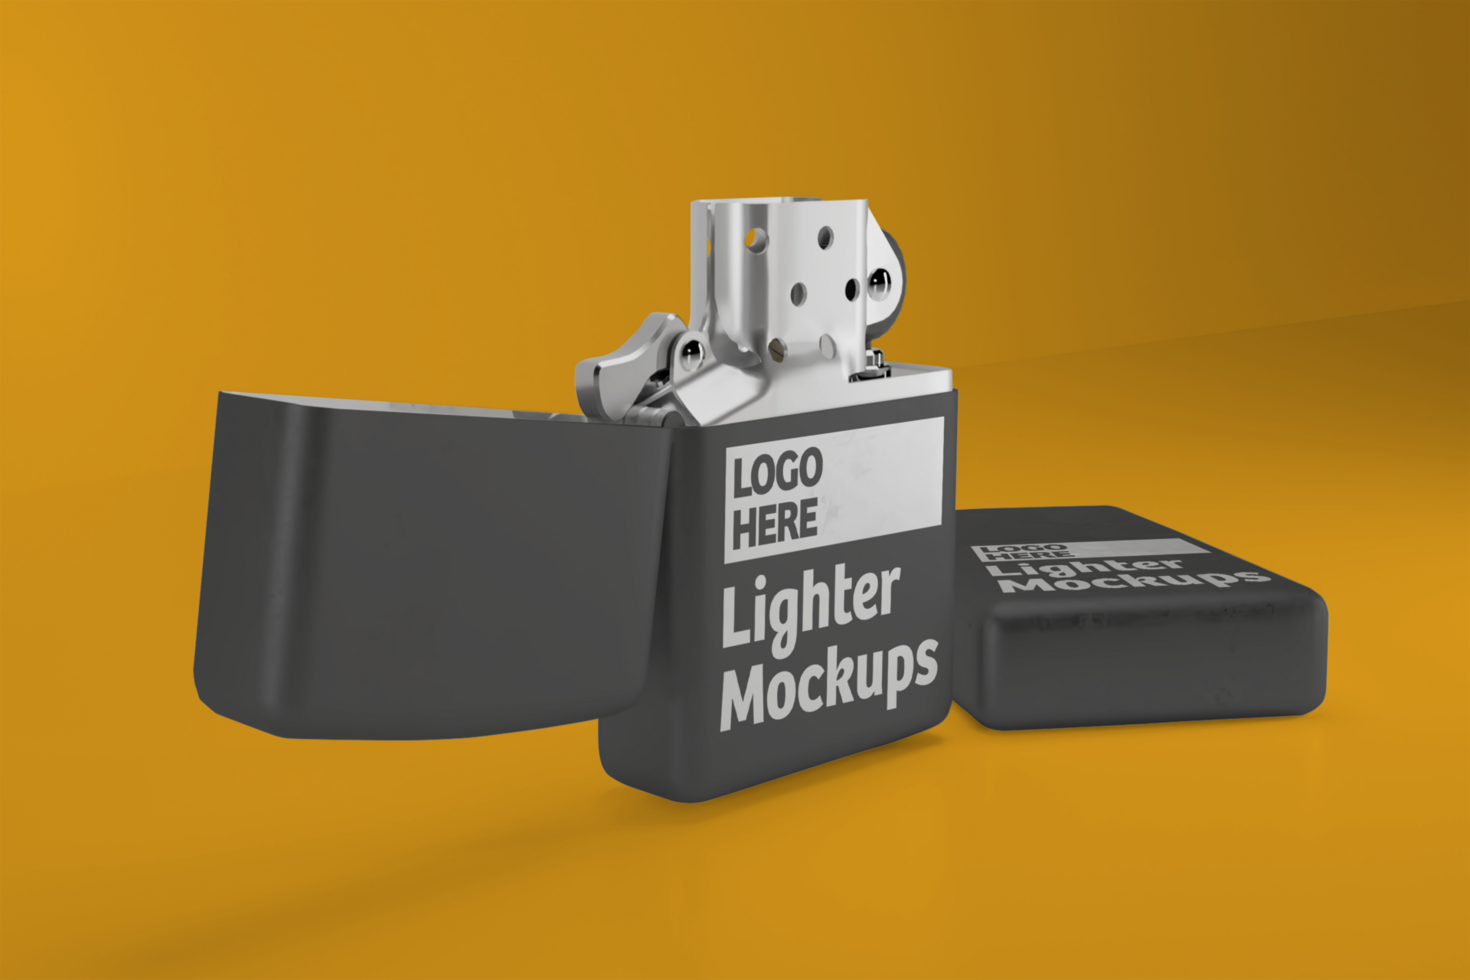 Stainless steel lighter, opened and closed mockup design psd